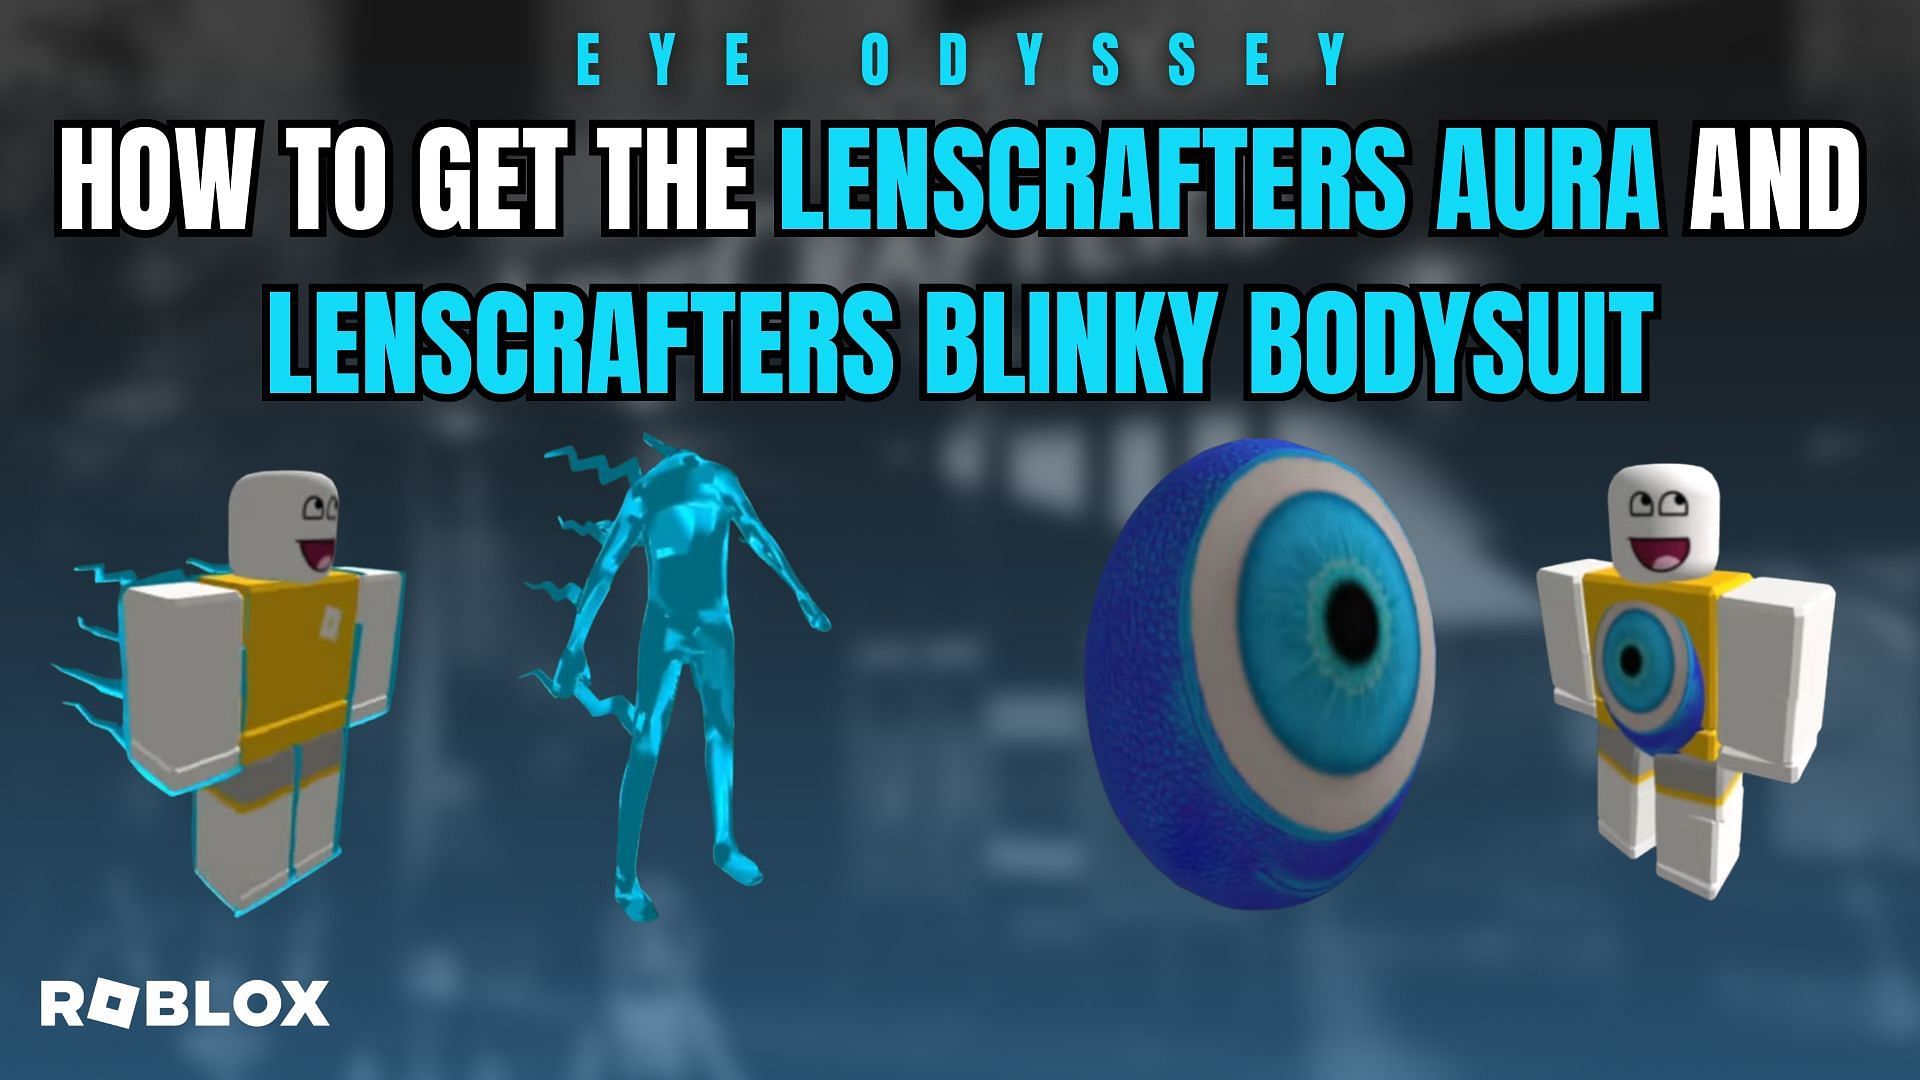 Get the LensCrafters Aura and the LensCrafters Bodysuit in Roblox Eye Odyssey now! (Image via Sportskeeda)